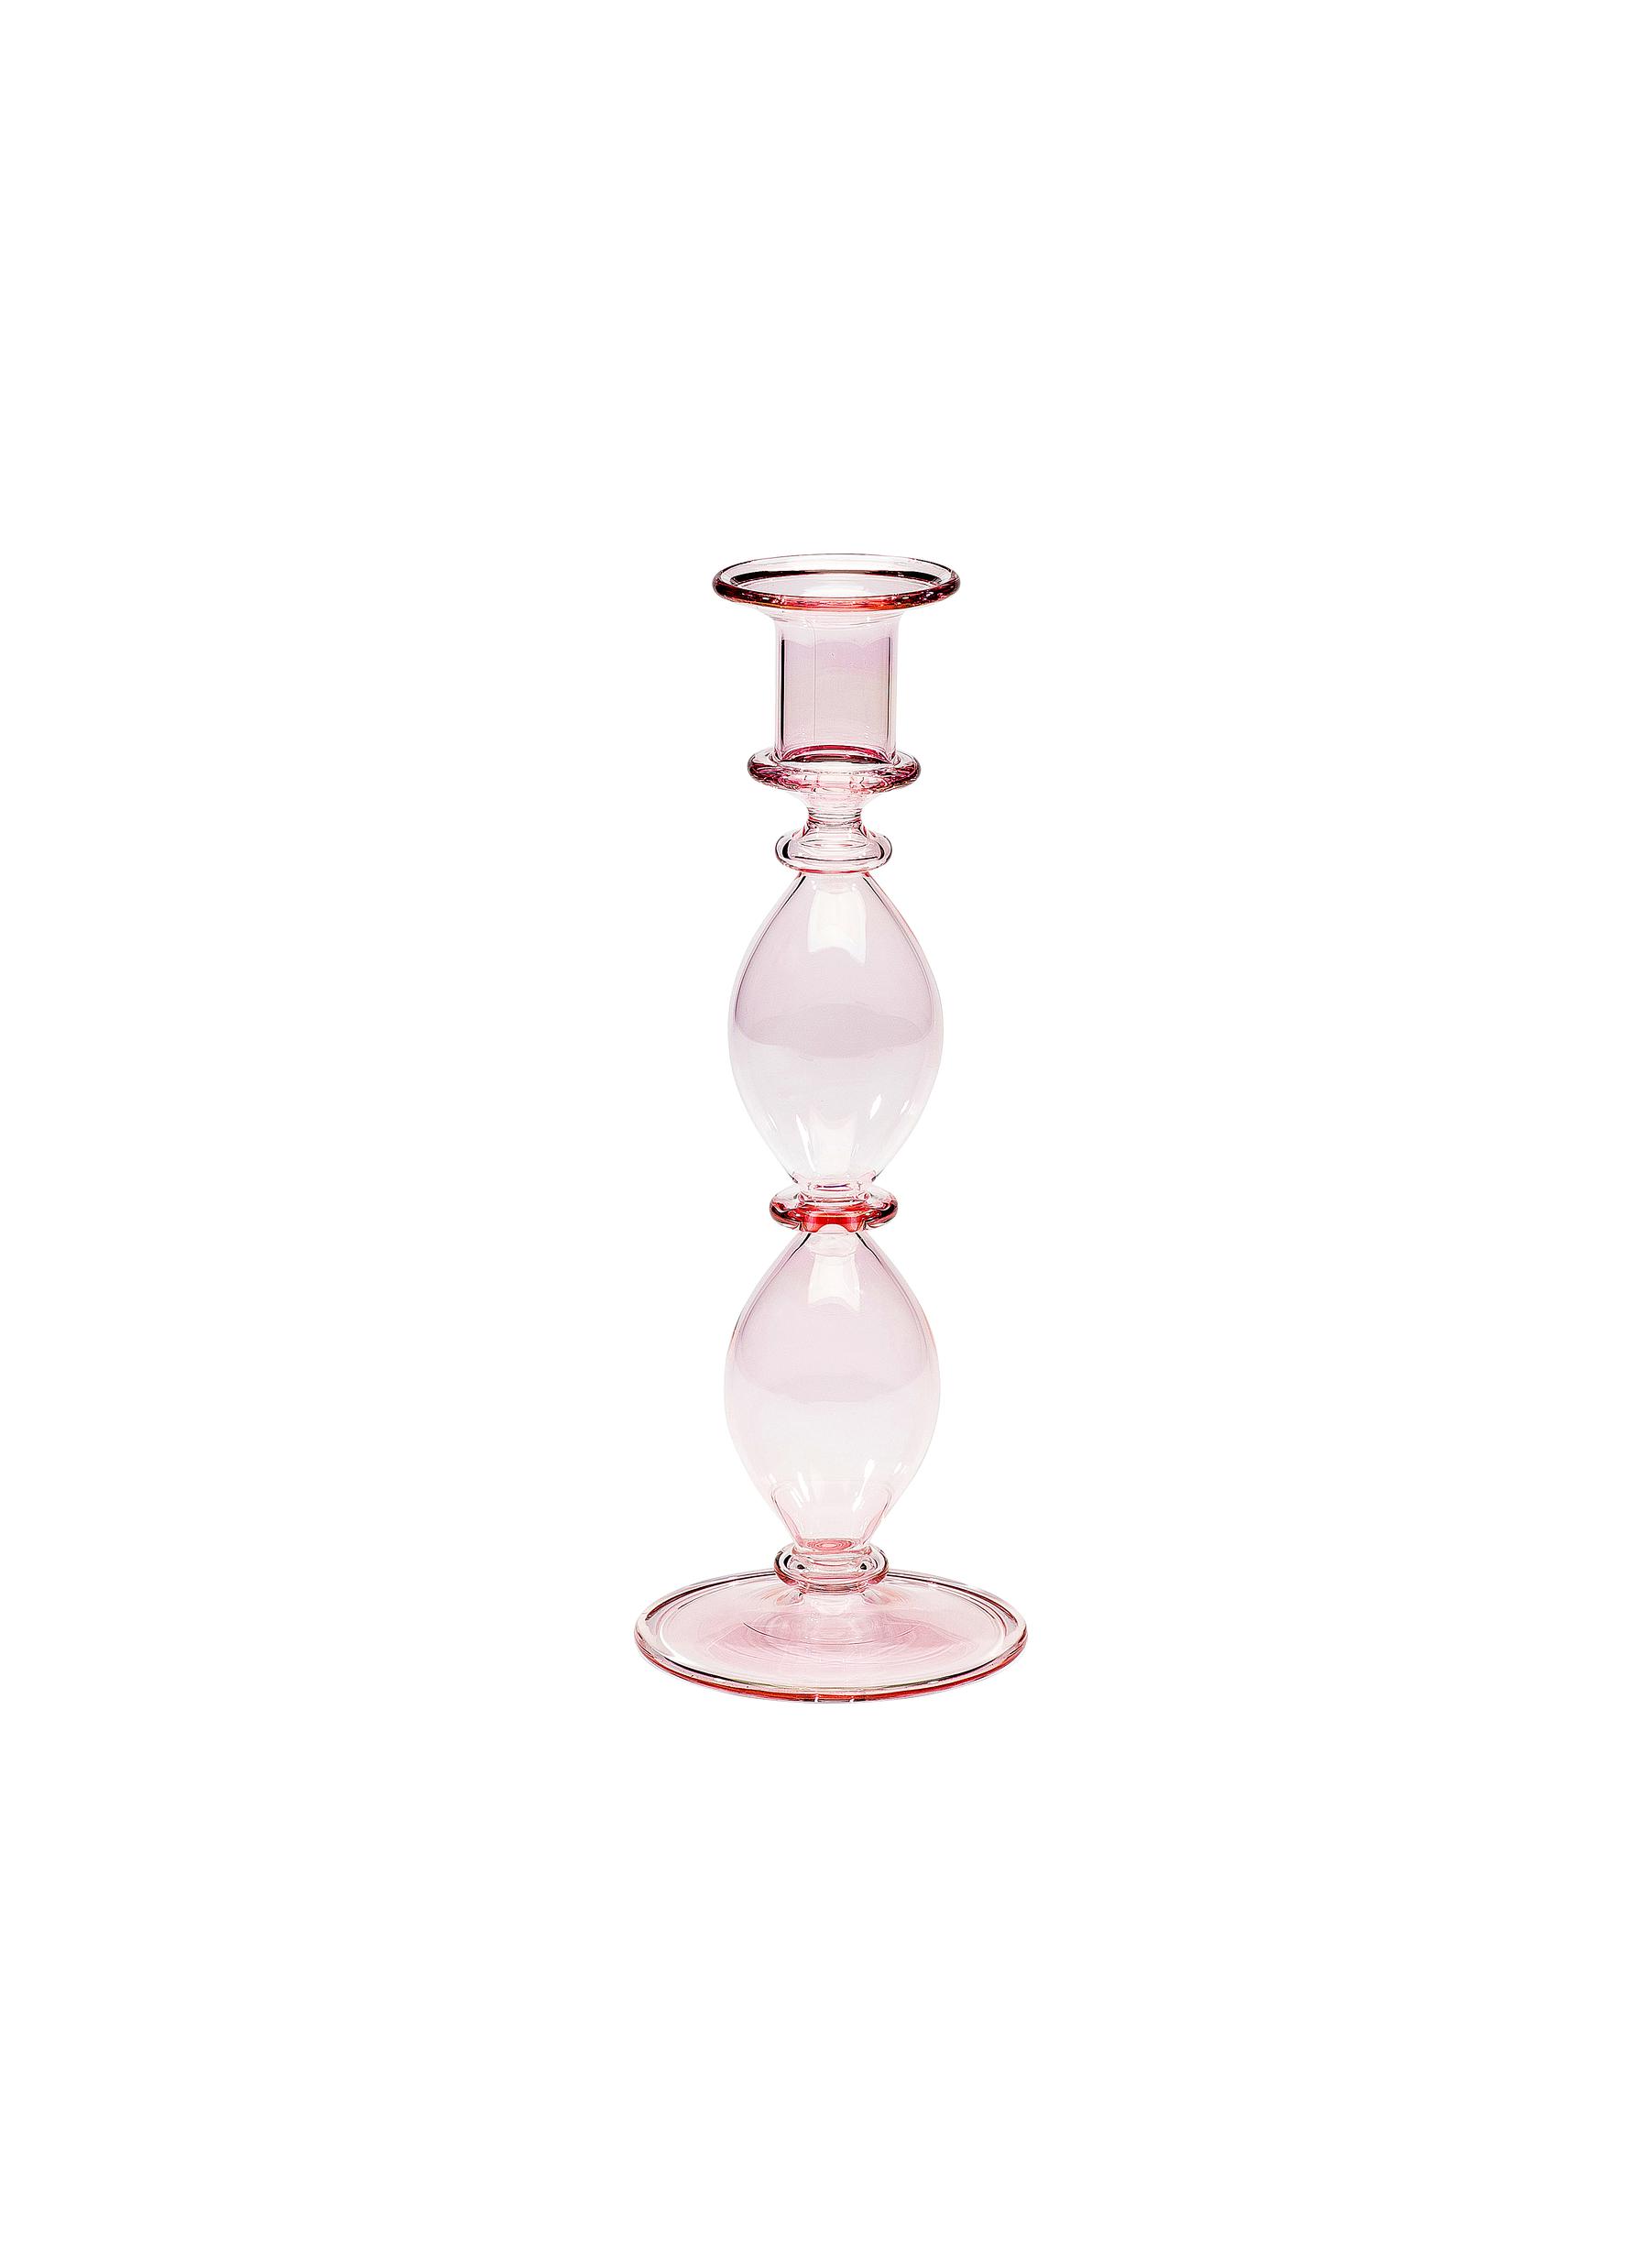 OLYMPIA GLASS CANDLE HOLDER